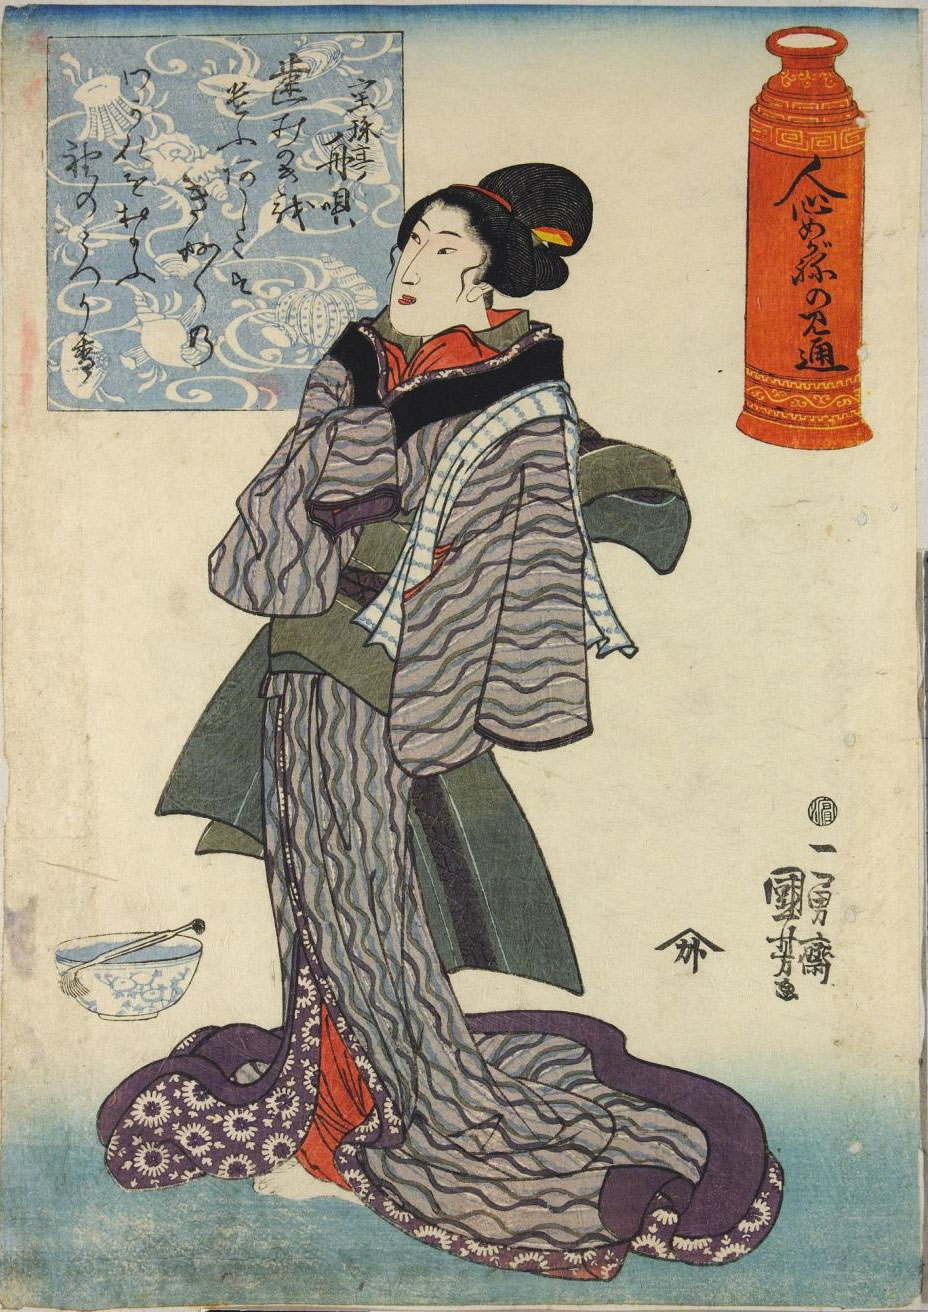 Colour woodblock print from the sereies Jinshin megane no mitōshi (Glasses for Inspecting the Human Heart), depicting a young woman standing with a water basin and toothbrush at her feet: Japan, by Utagawa Kuniyoshi, c1845.